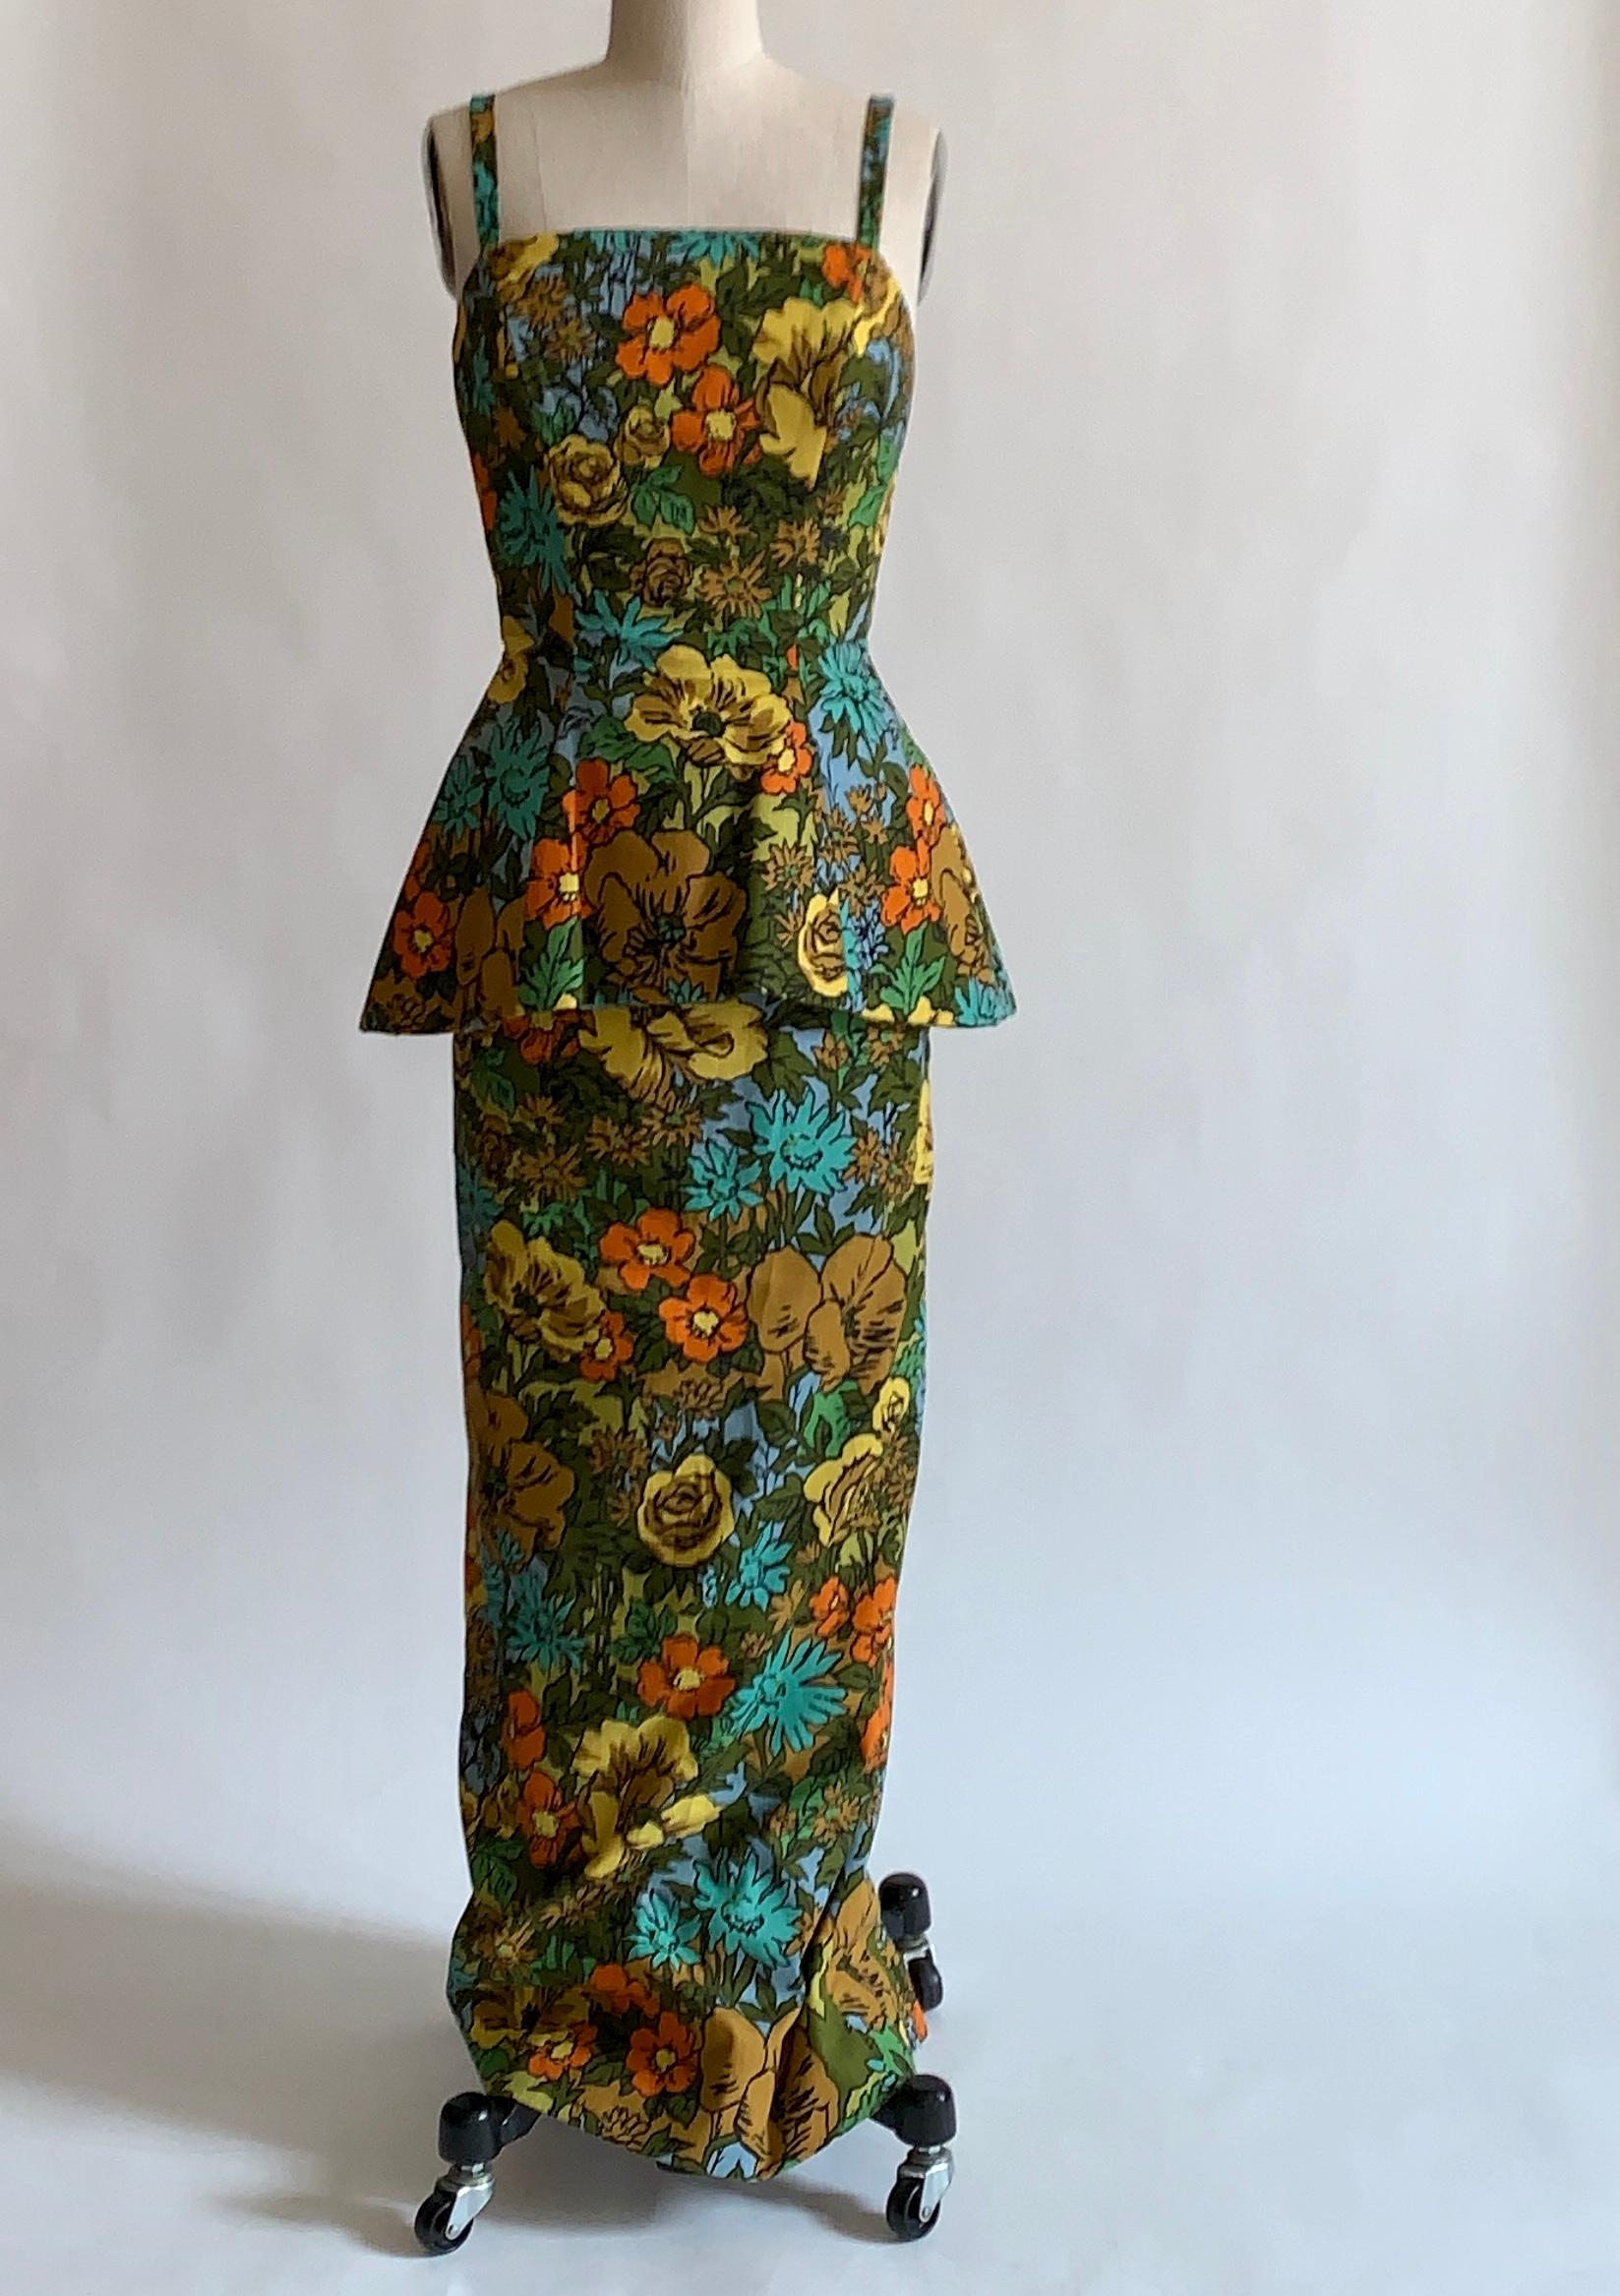 Stunning 1960s vintage Mr. Blackwell Custom floral print dress in vibrant shades of yellow, orange, brown, blue, and green. Peplum waist that feels like it must be enforced with horsehair.  Slit at center back. Two zips at back, with small bow